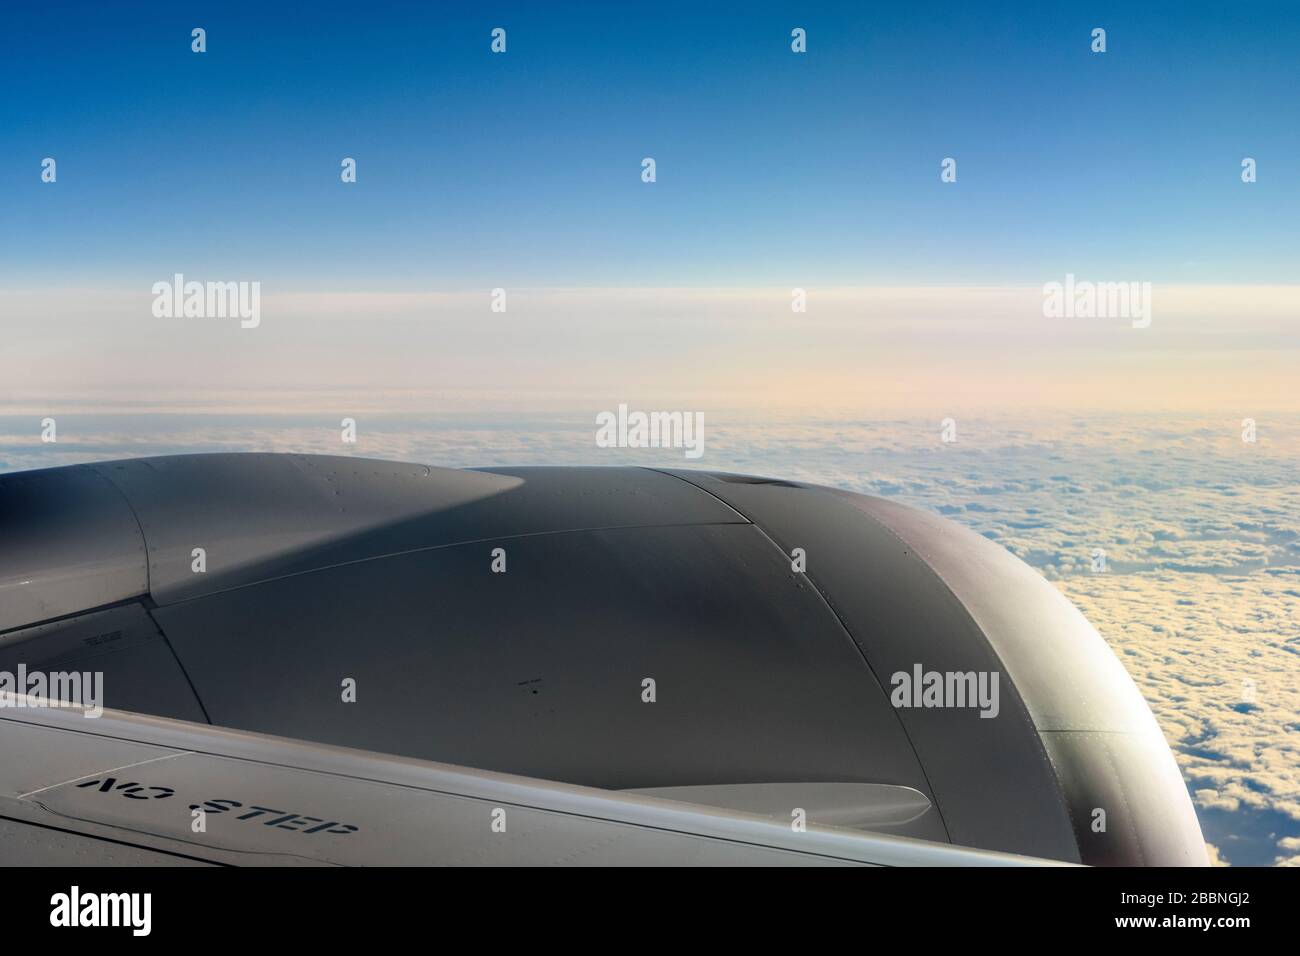 In flight view looking across a Boeing 787 Dreamliner engine high above the clouds Stock Photo